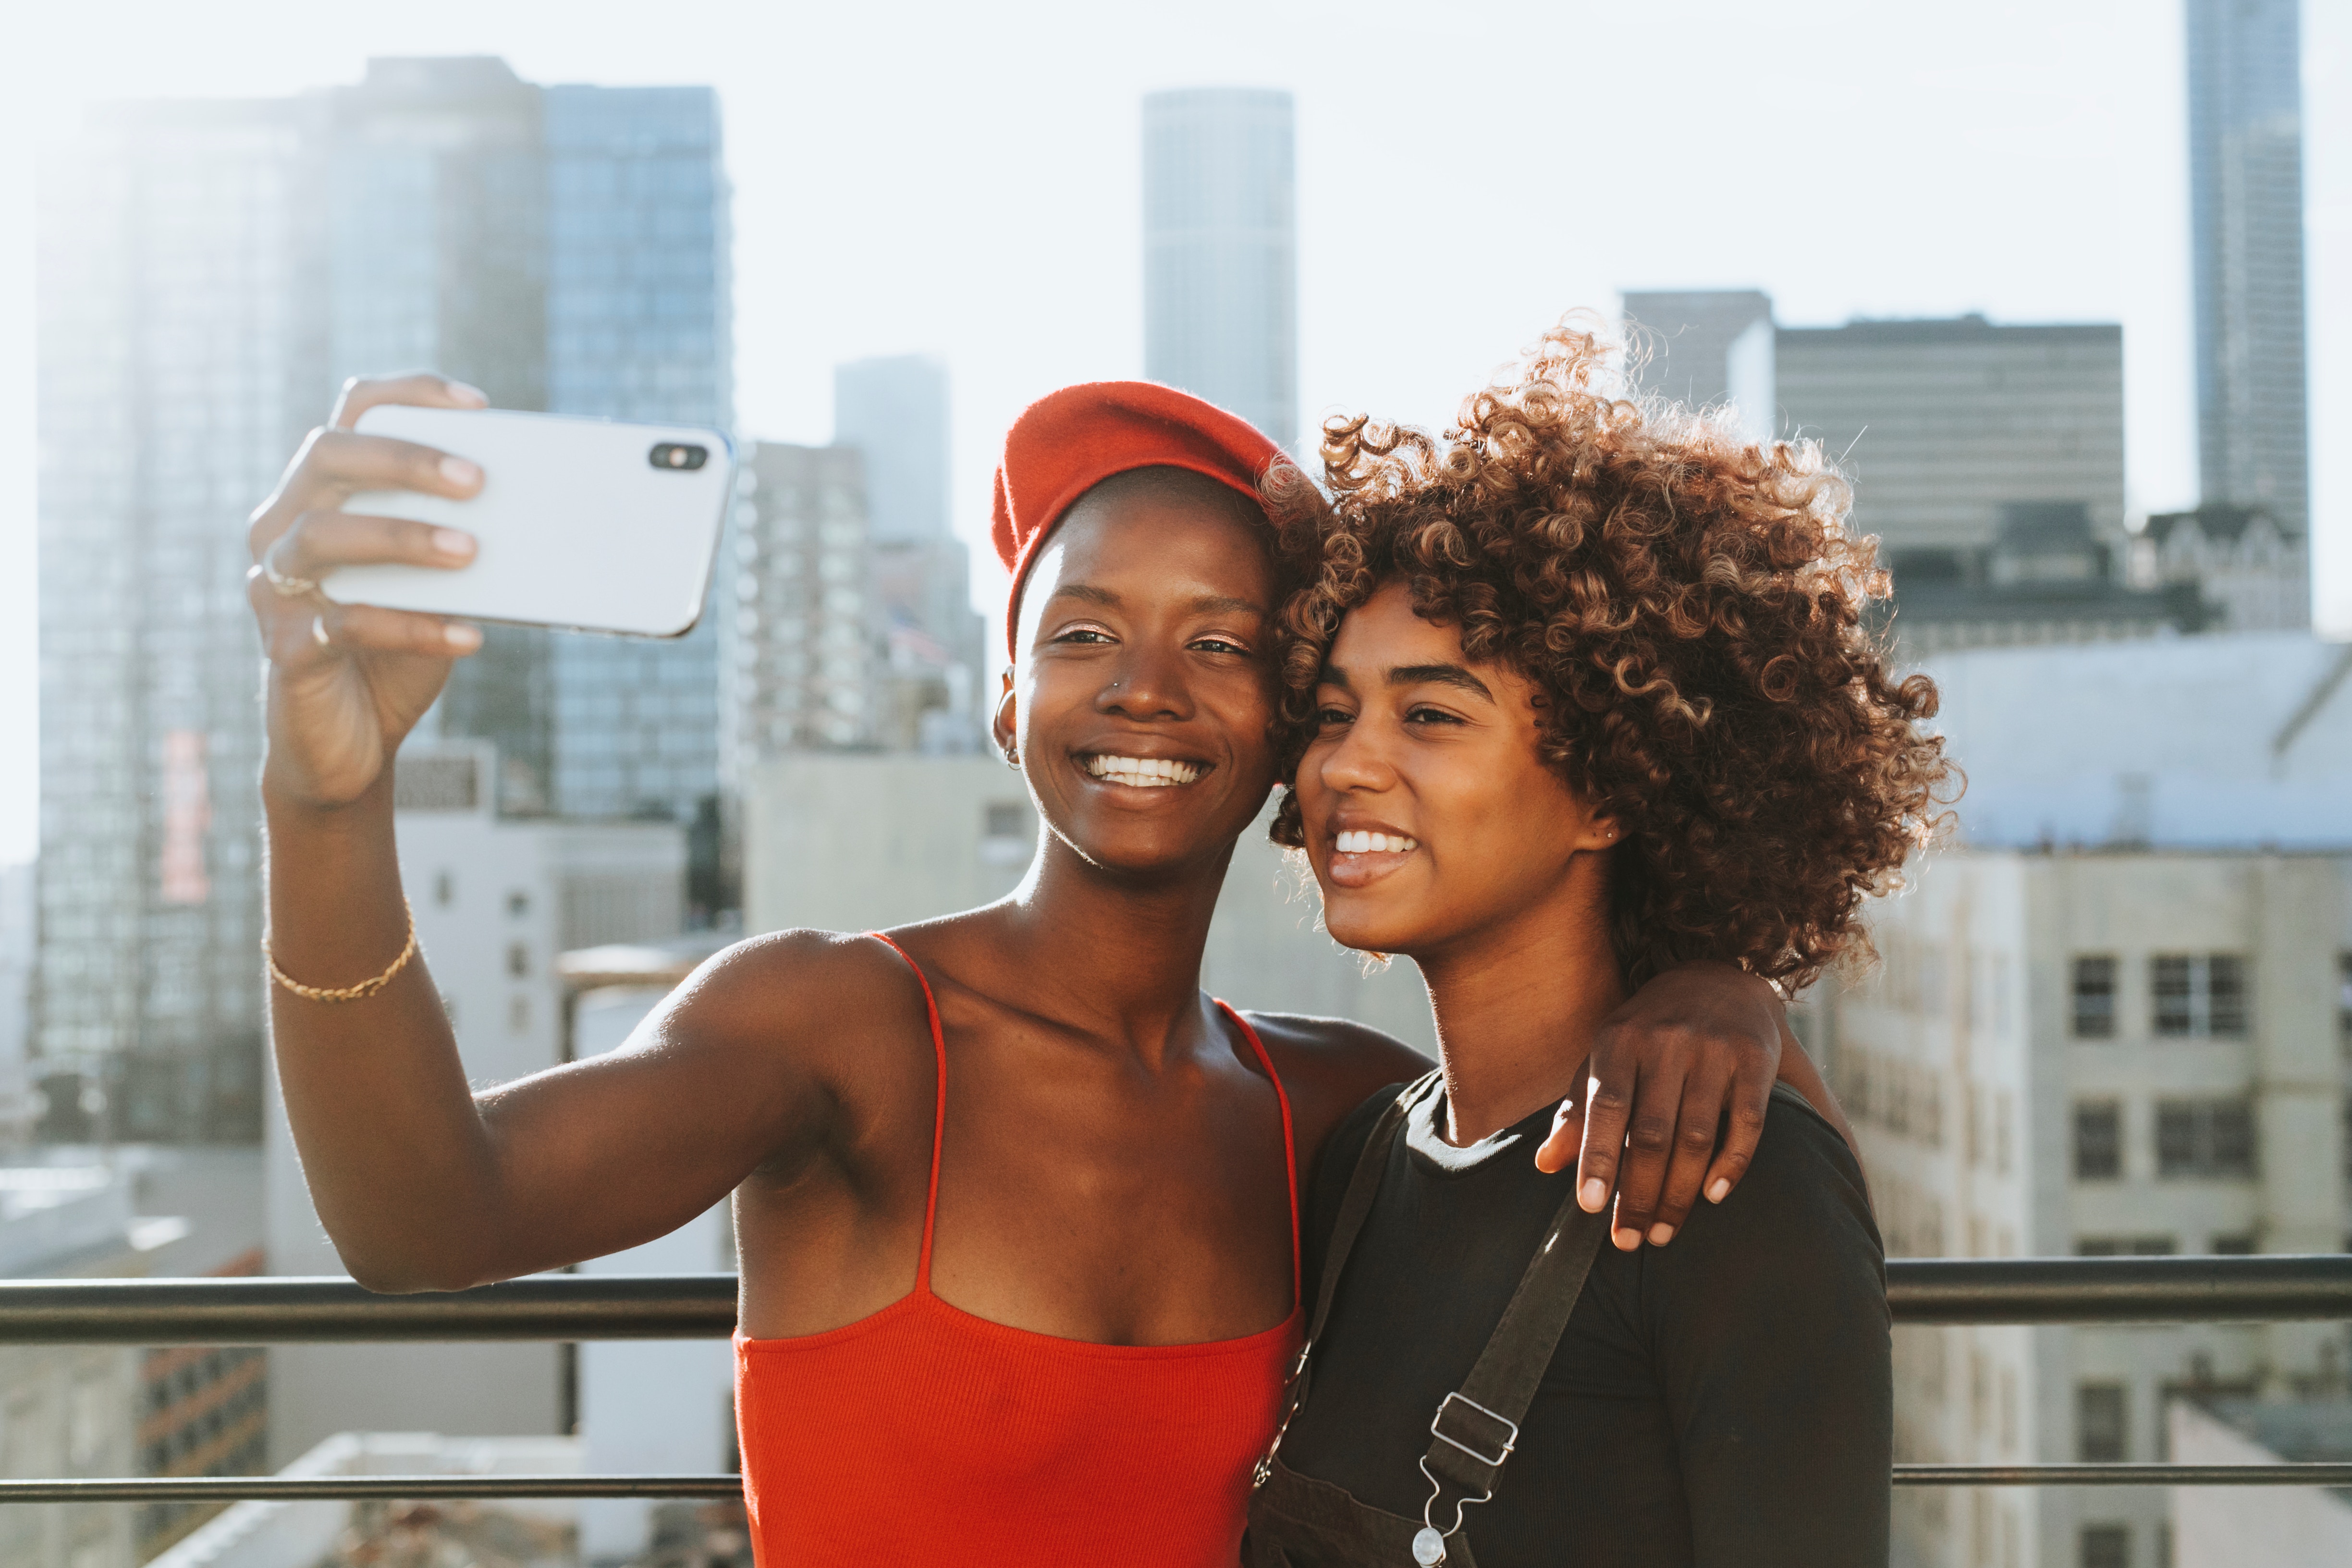 How to match with more queer women and non-binary people on dating apps